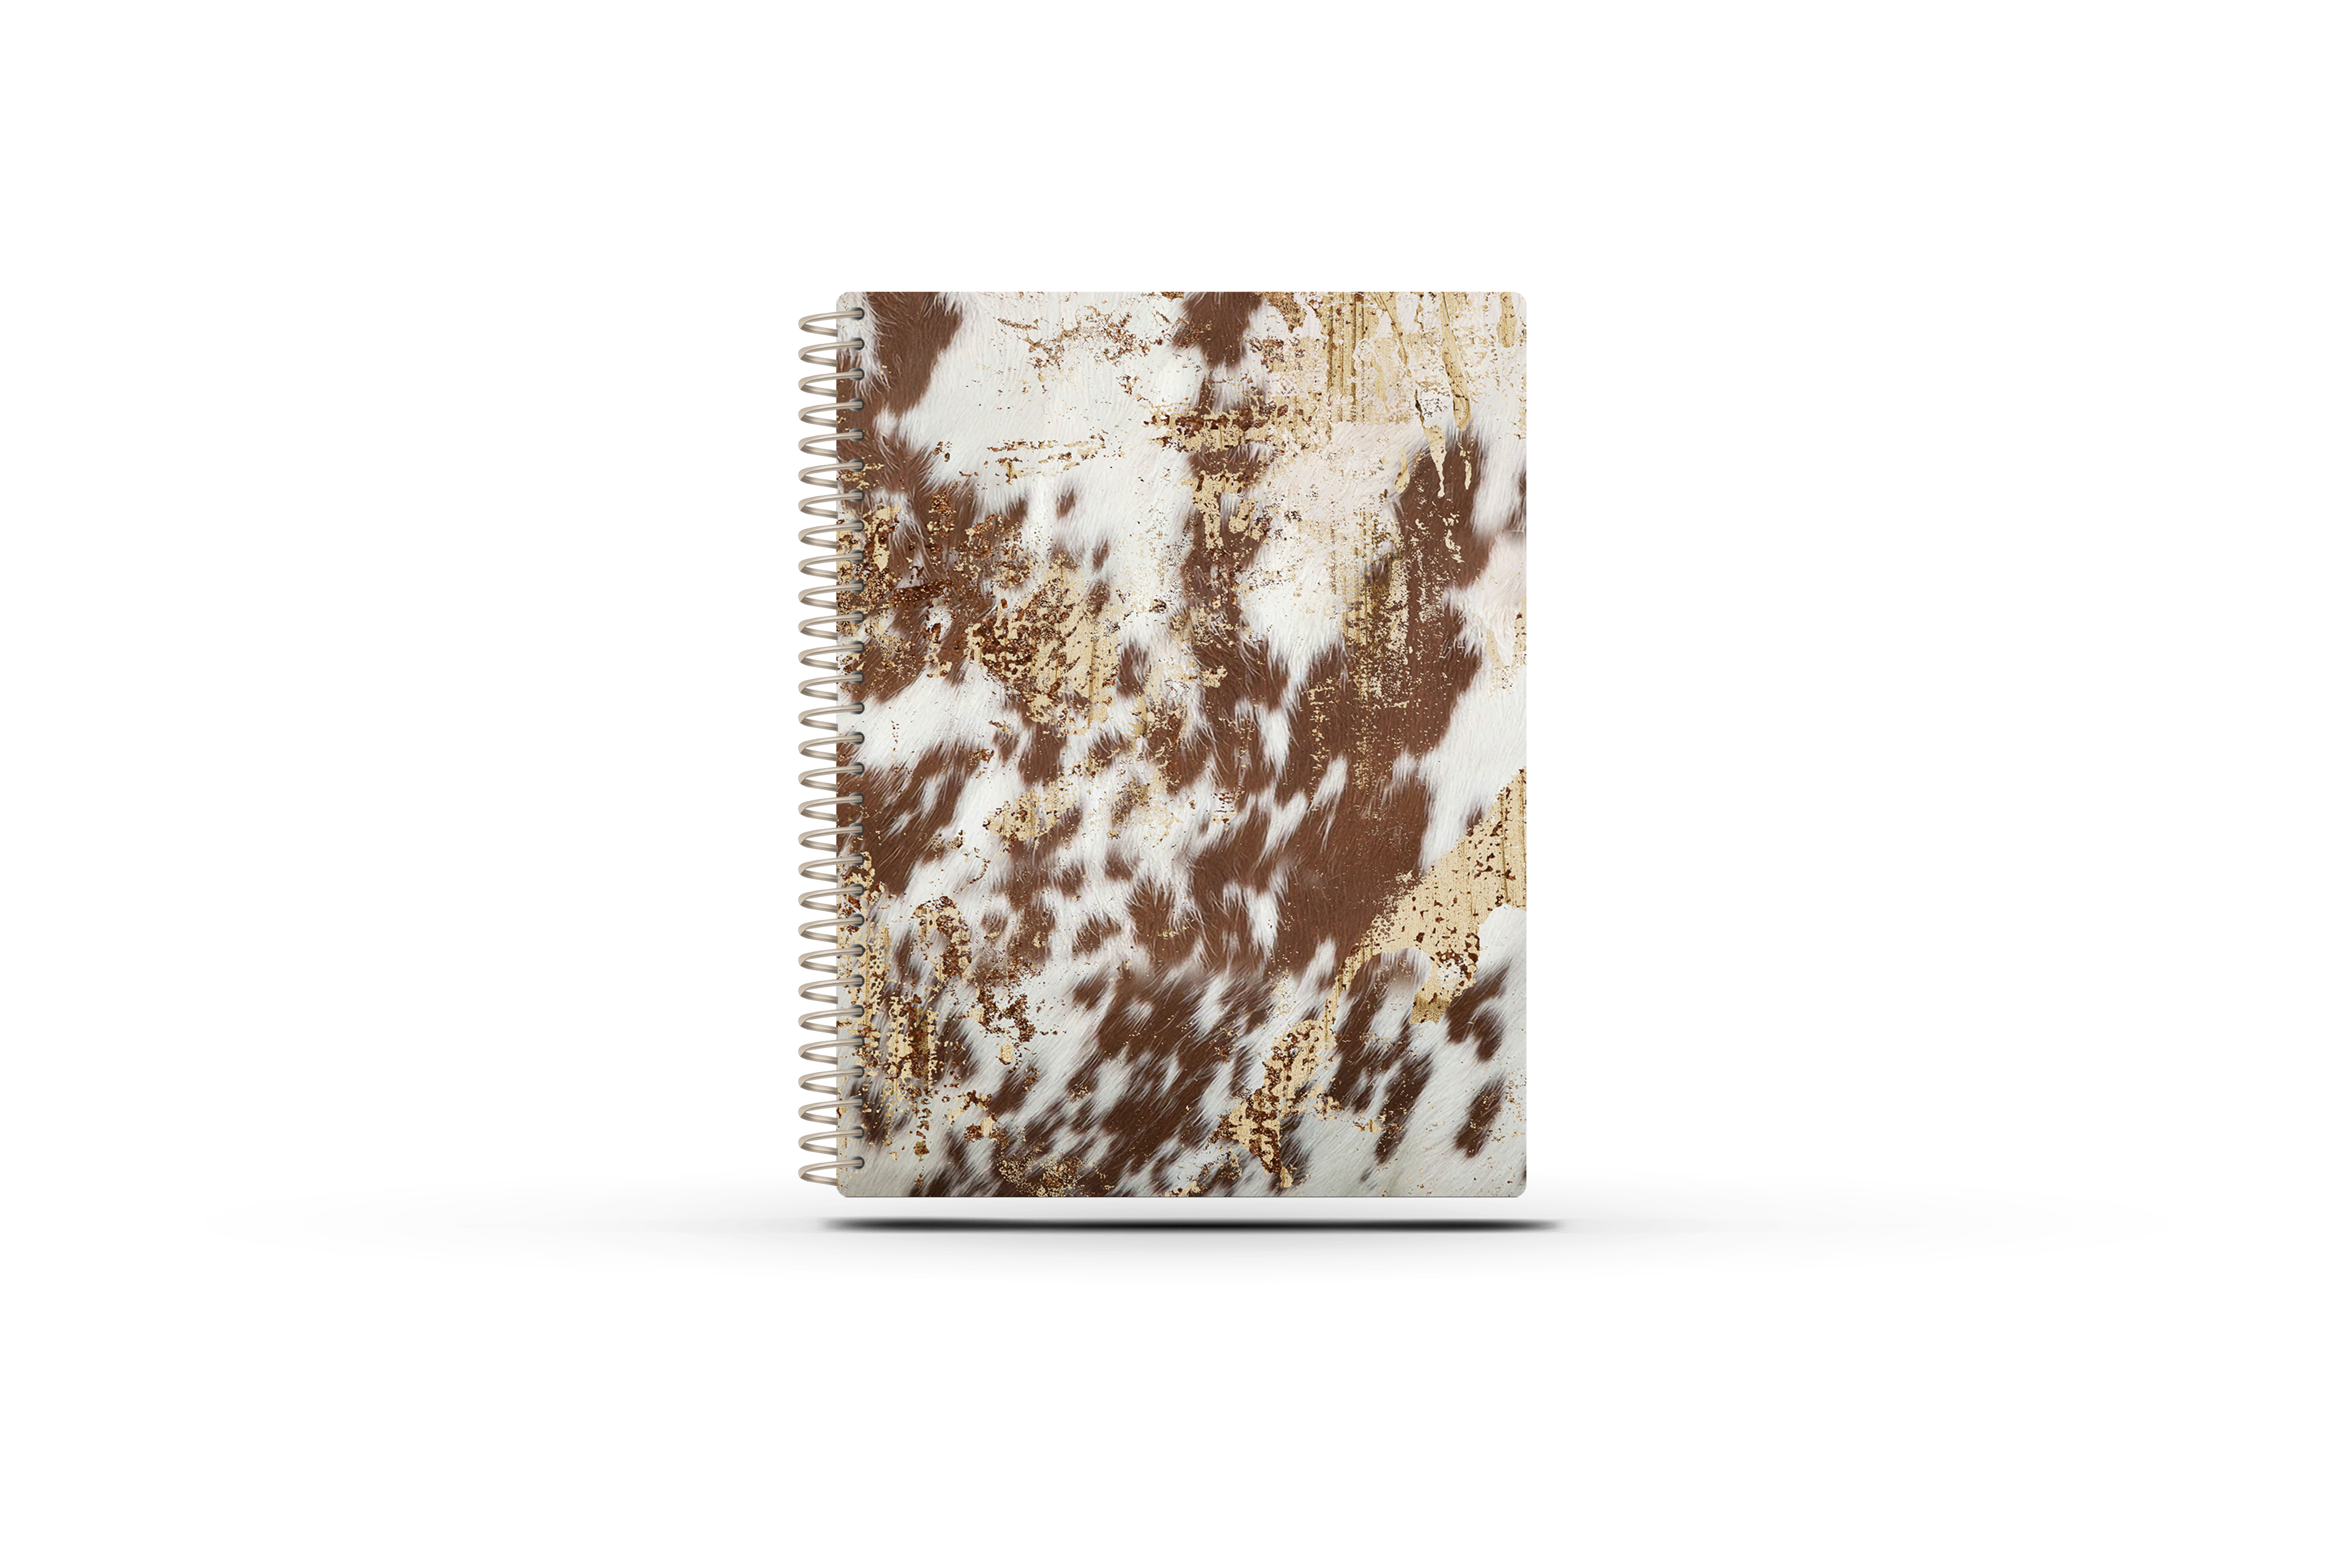 Sales Tracker Appointment Book - DSG RUSTIC COWHIDE